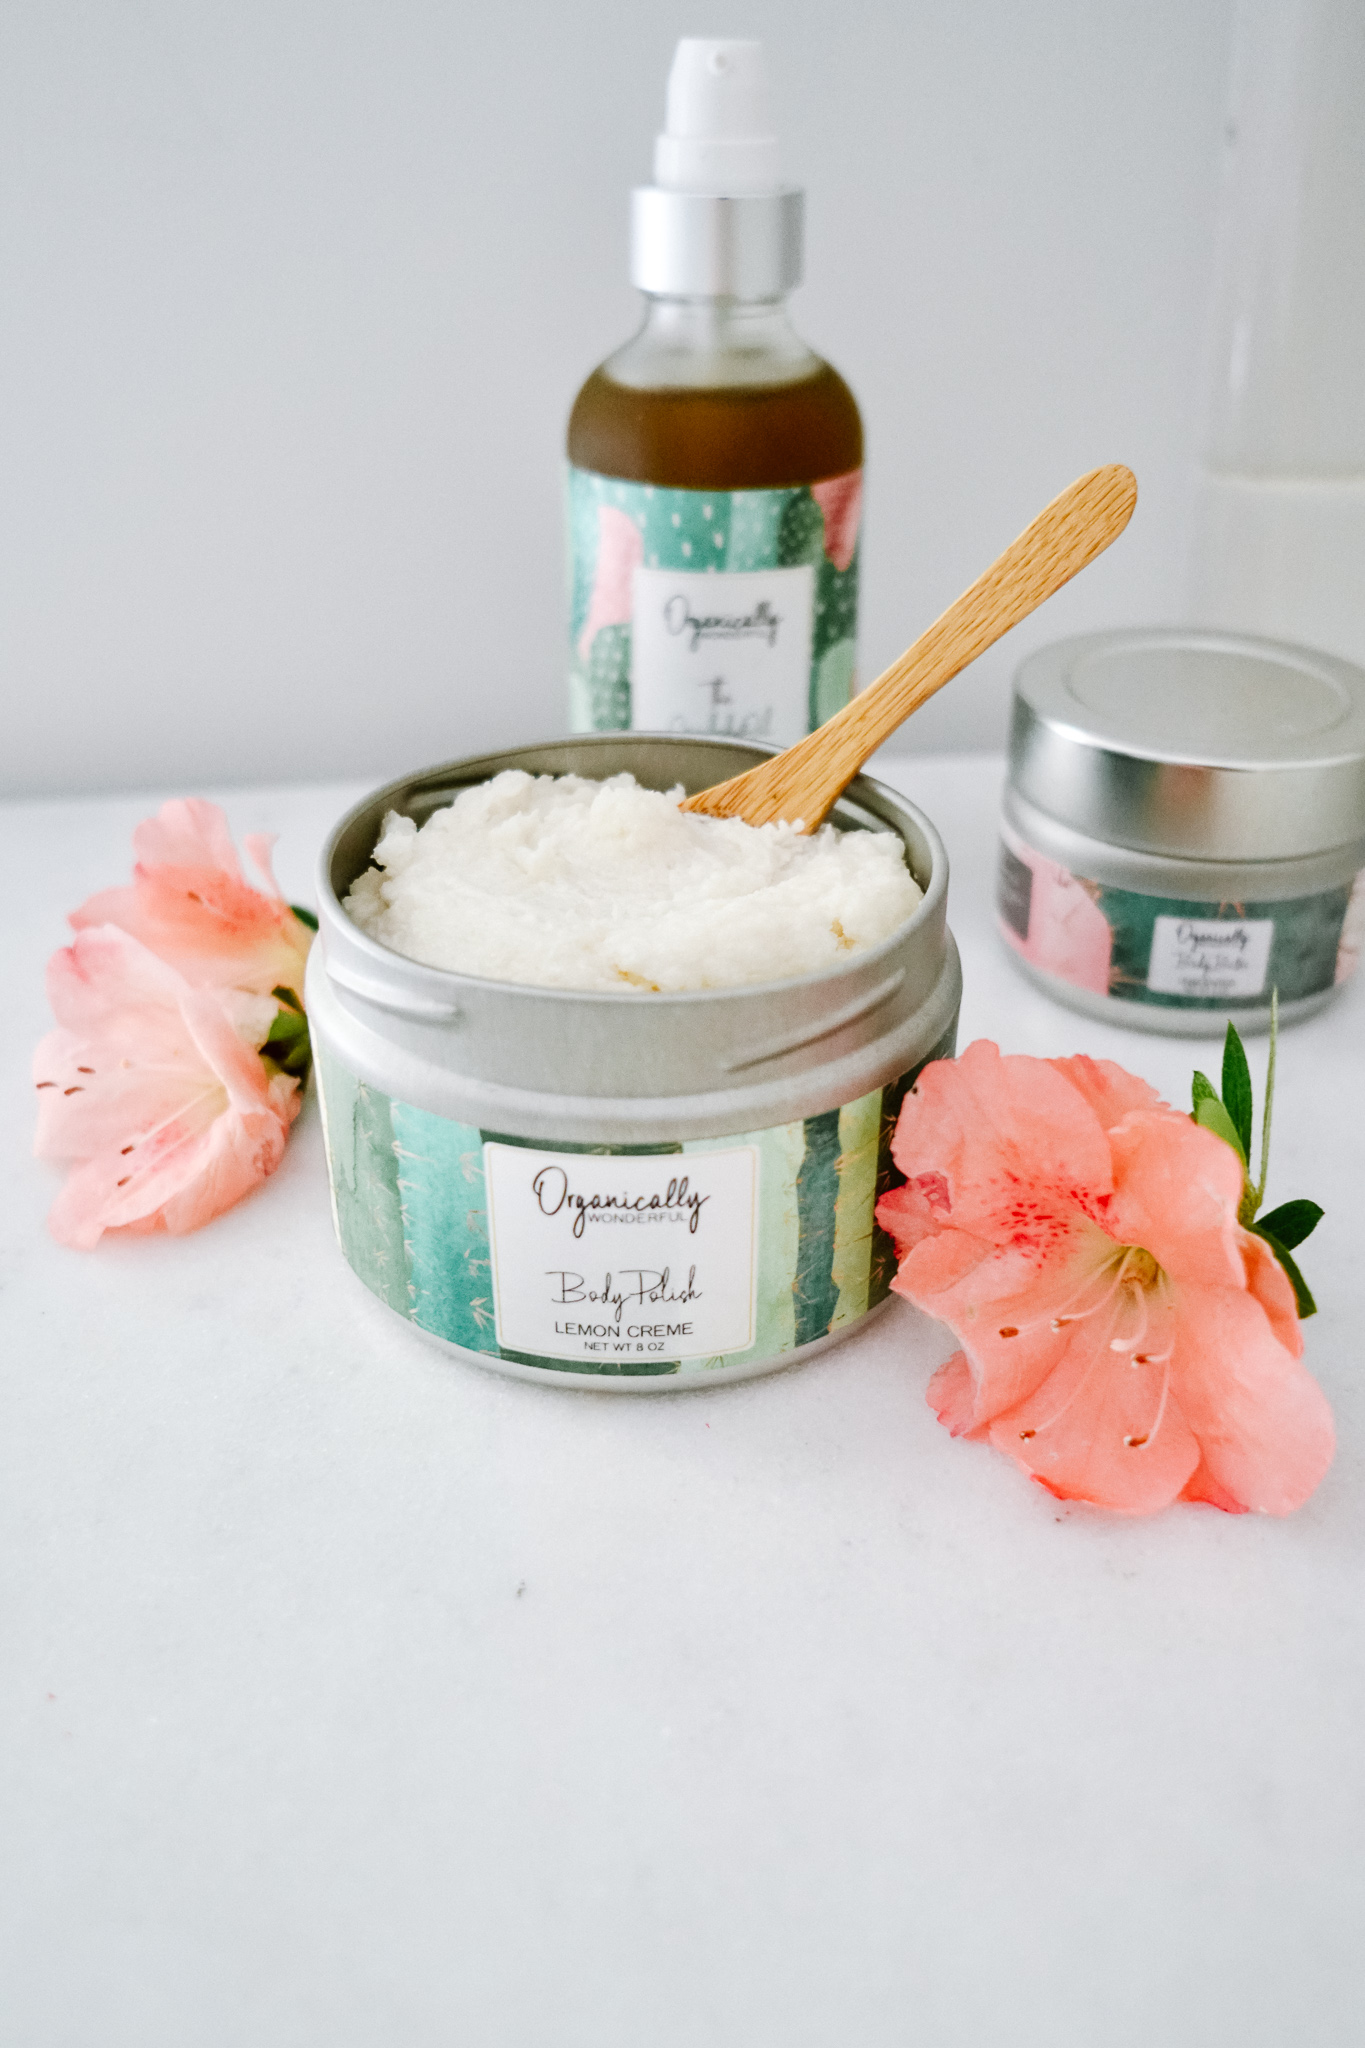 Organically Wonderful Body Scrub open on counter with flowers and other products behind it